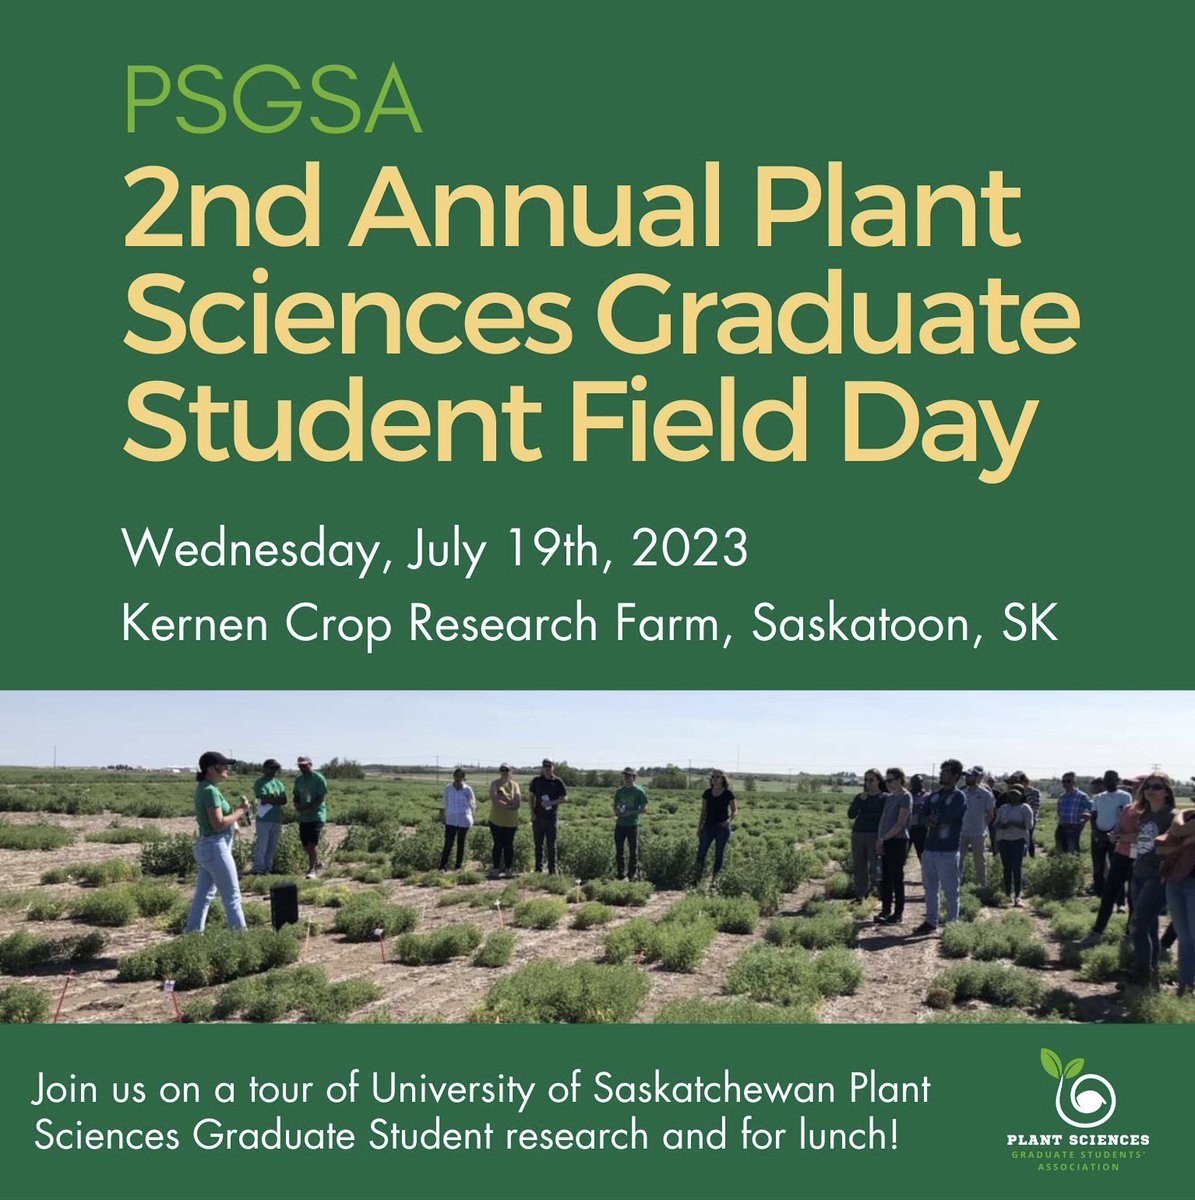 The PSGSA would like to formally invite you to the 2nd Annual Plant Sciences Graduate Student Field Day! The event will take place on July 19, 2023, at the Kernen Crop Research Farm. 

For more information and to RSVP, please check out the email you received!